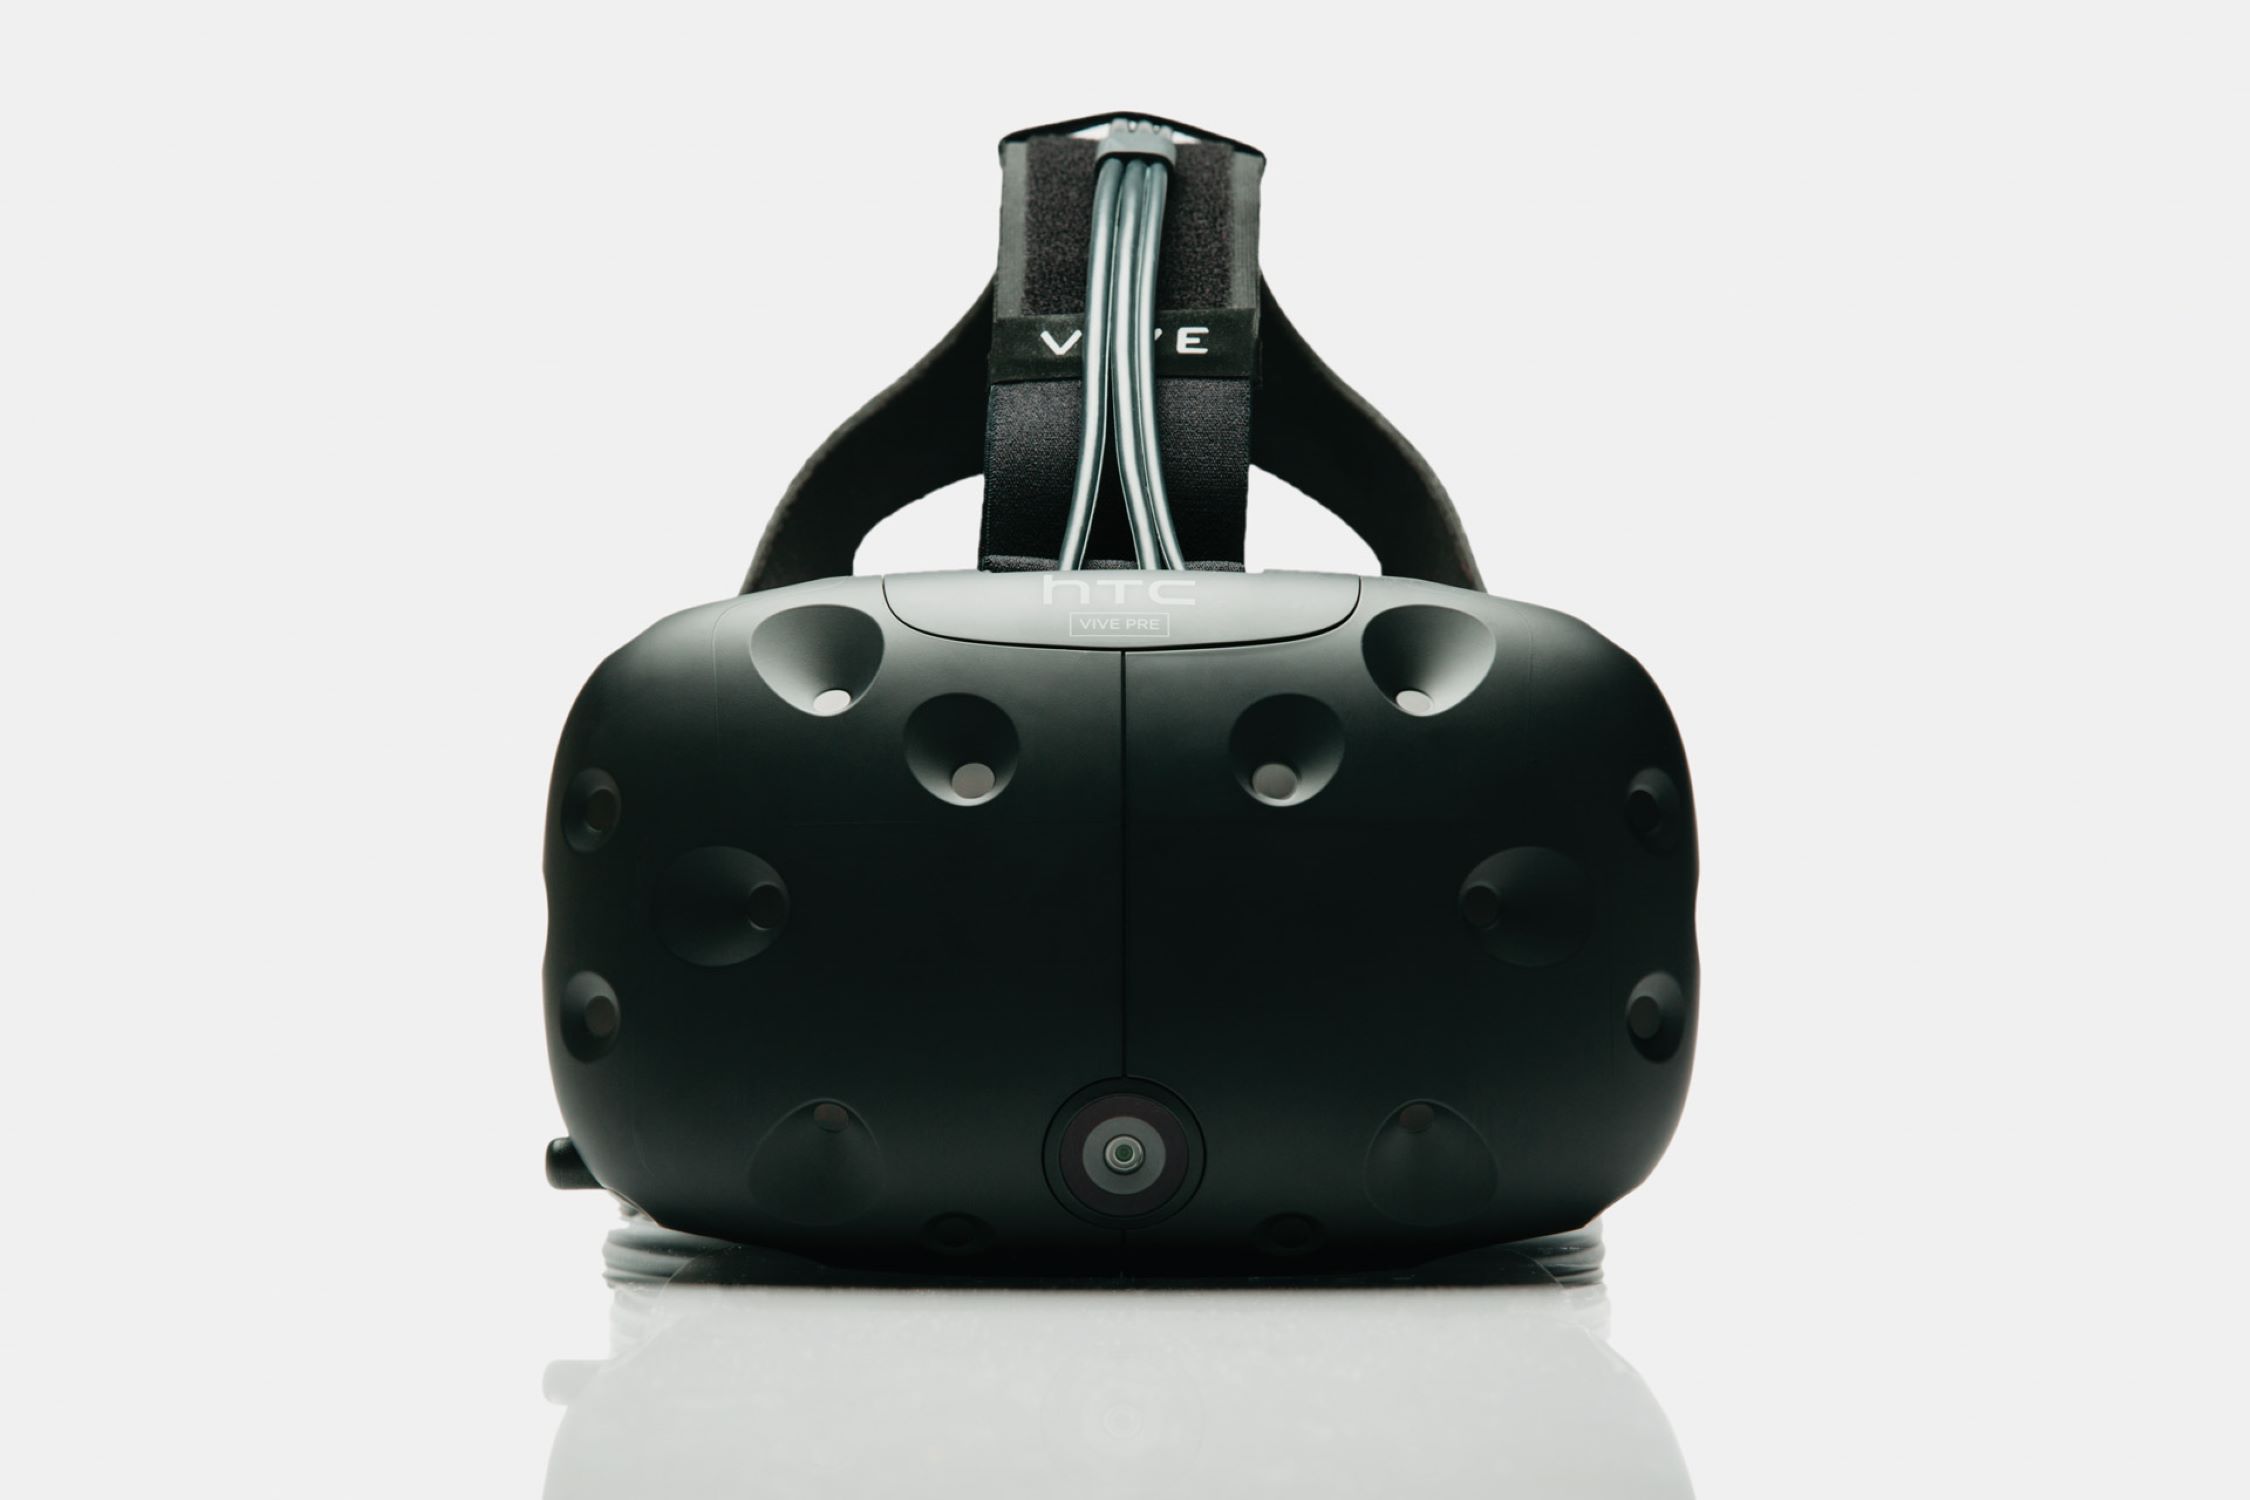 HTC Vive: How To Turn On Direct Mode